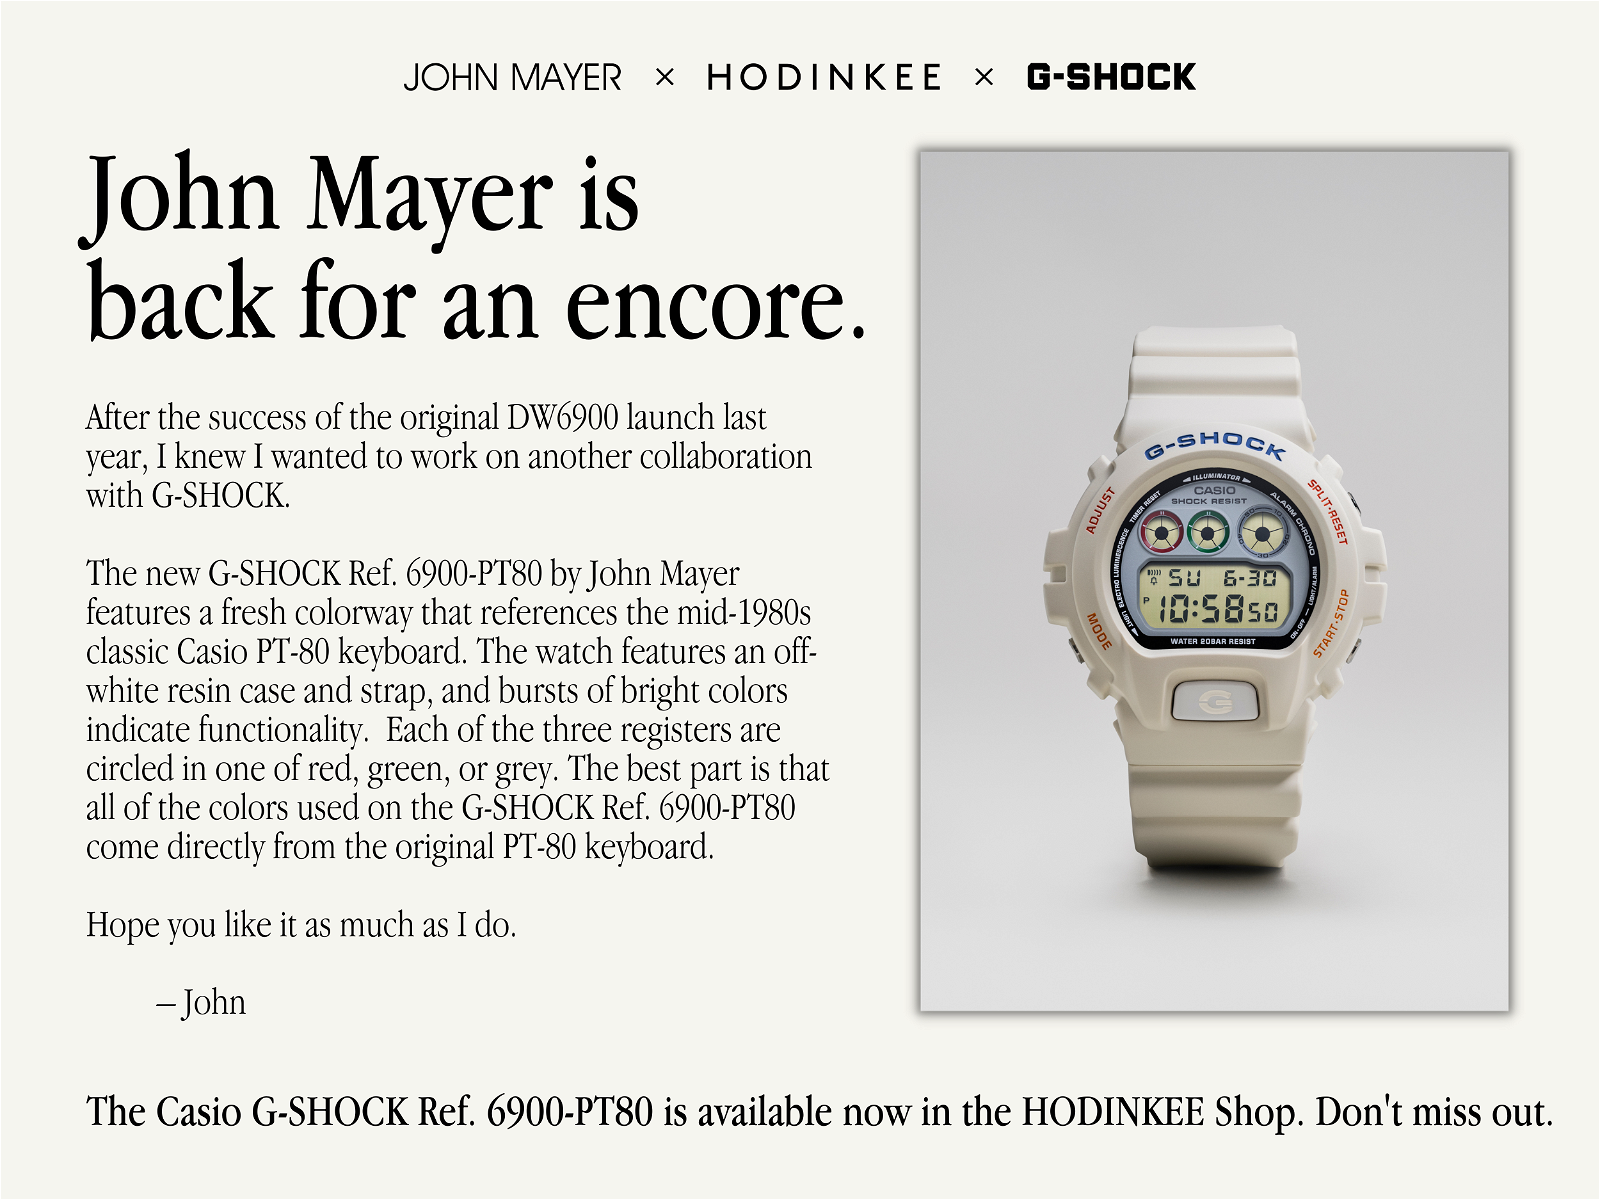 HODINKEE: It's Here: The G-SHOCK Ref. 6900-PT80 By John Mayer | Milled